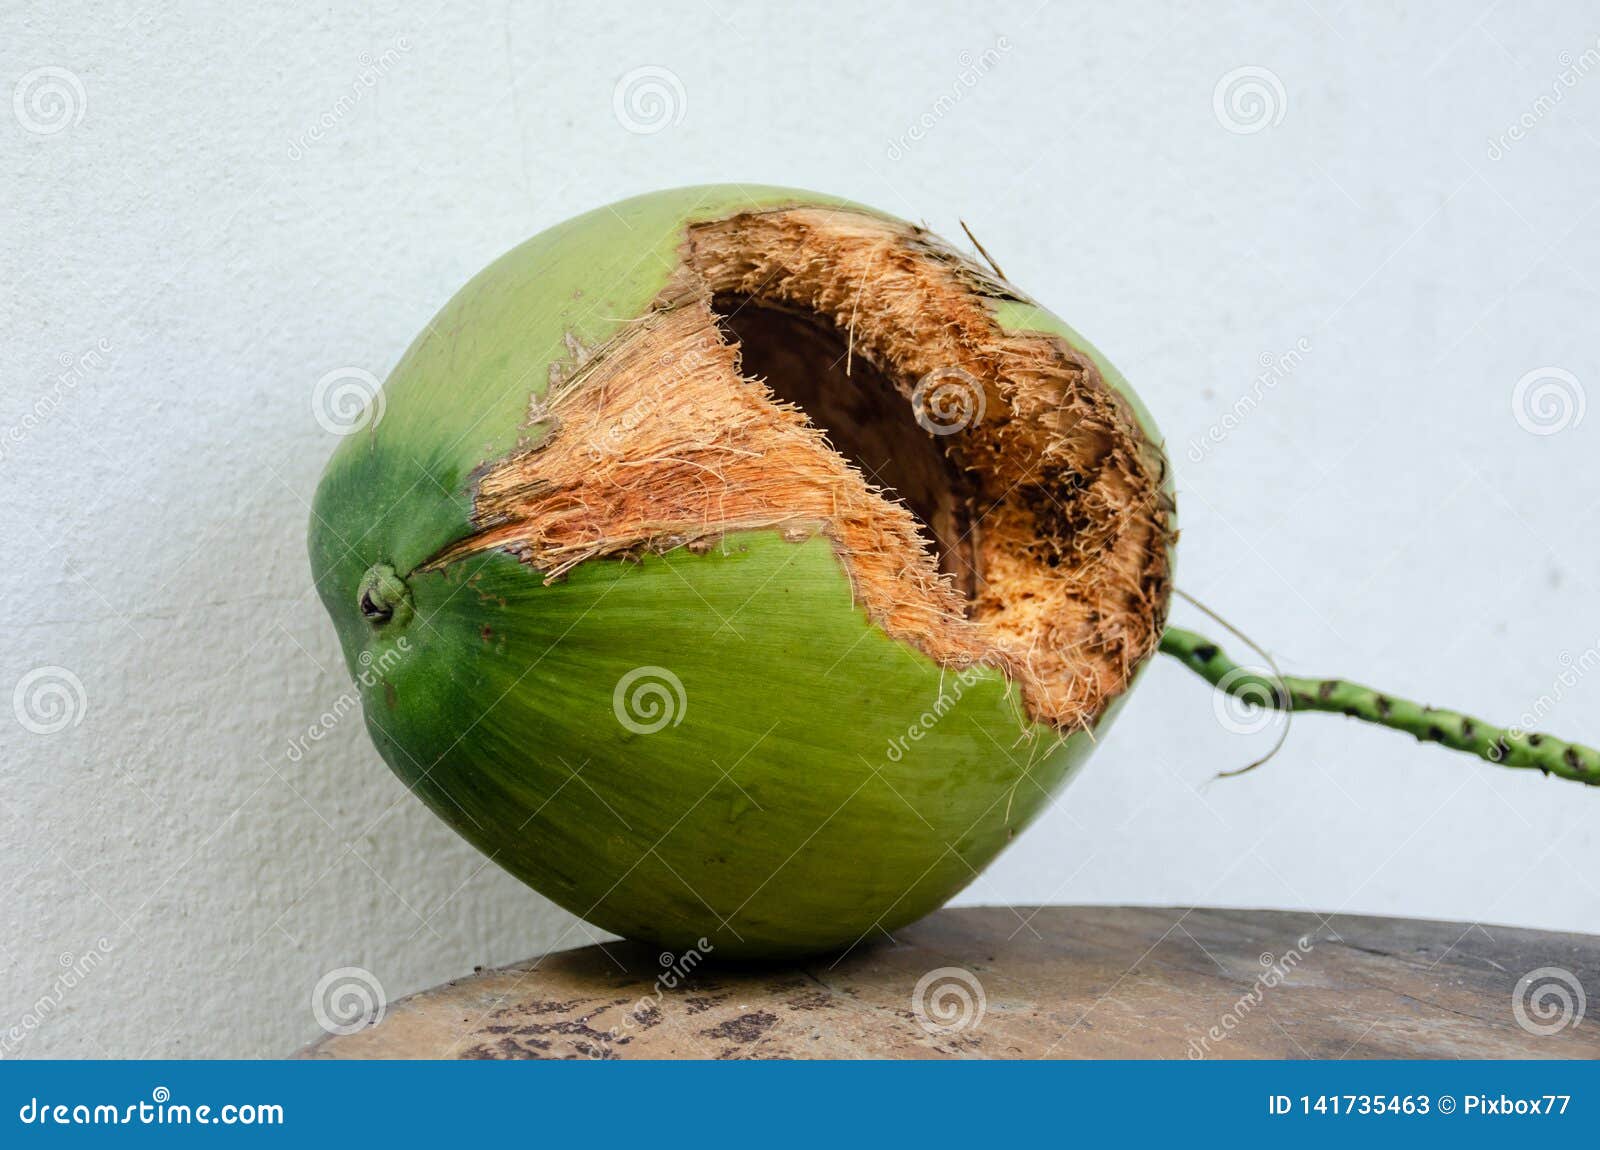 Green Coconut with Hole on Table Stock Image - Image of nutrition, nice ...